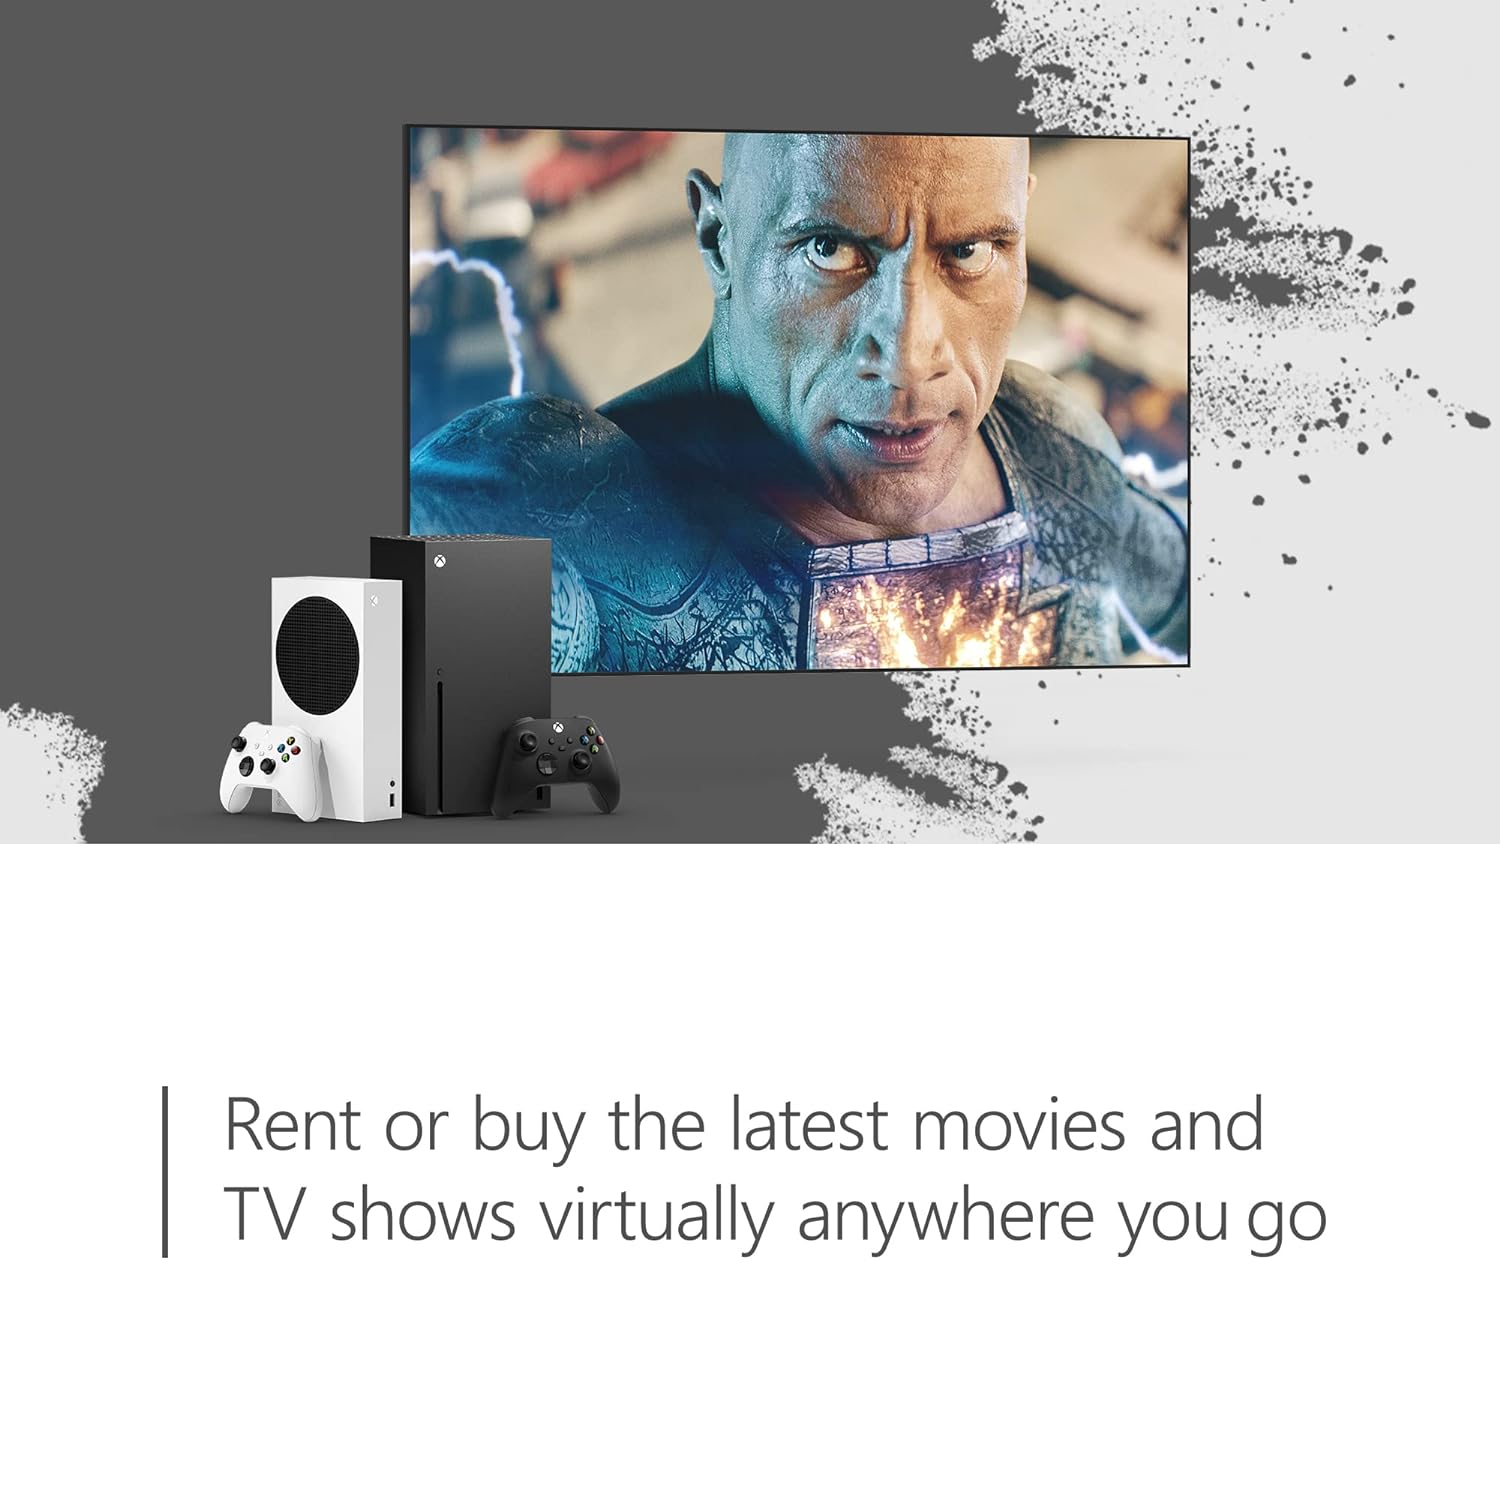 $20 Xbox Digital Gift Card | Rent or buy the latest movies and TV shows virtually anywhere you go.